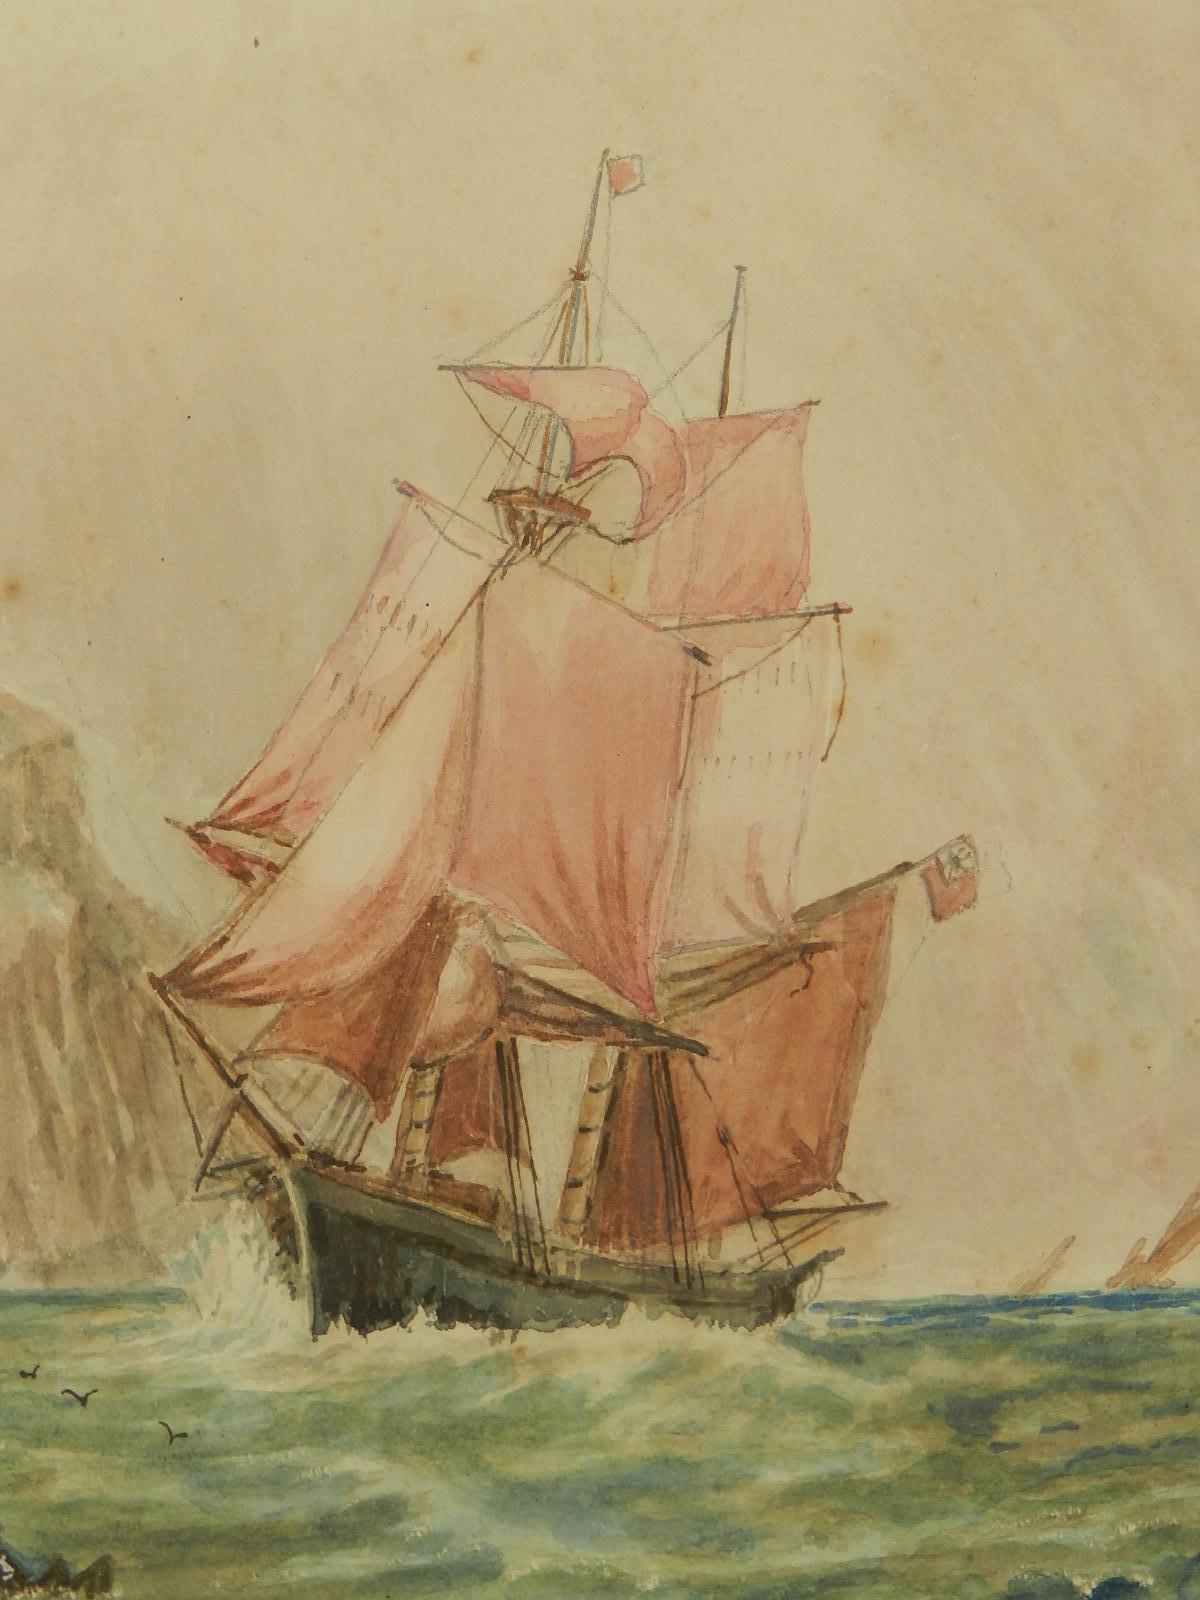 Watercolor Sketch Sailing Ship at Sea English Marine by John Moore late 19th Cen - Art by Unknown